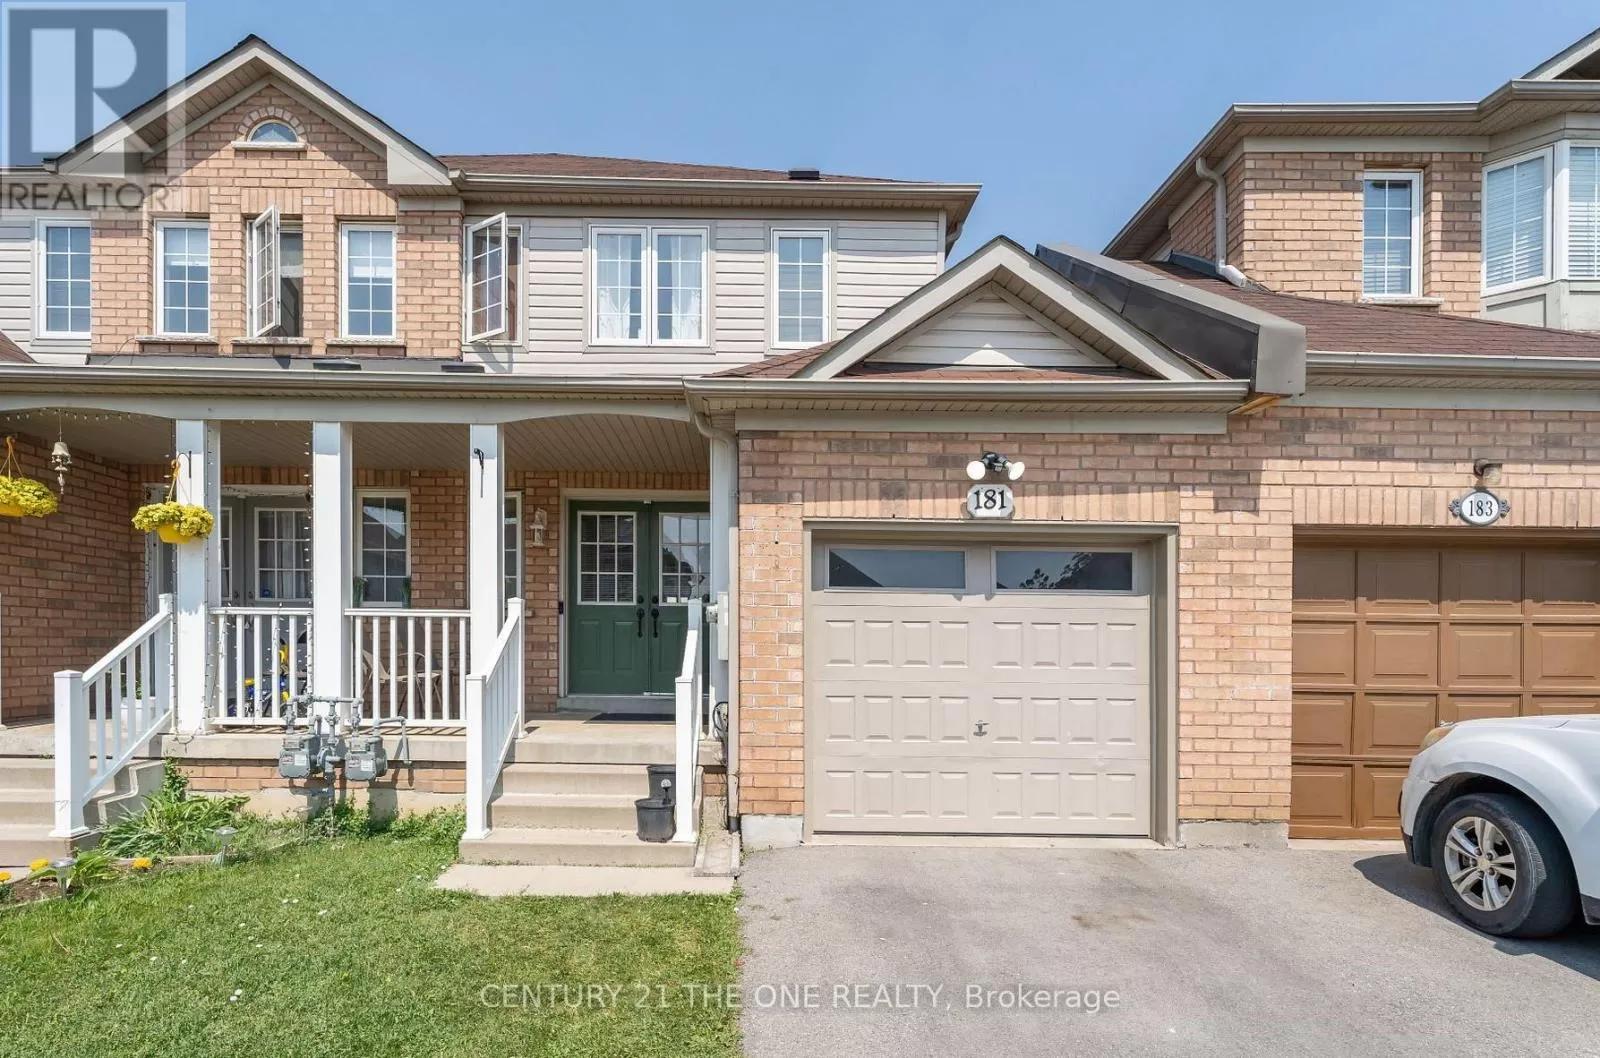 Row / Townhouse for rent: Bsmt - 181 Sherwood Road, Milton, Ontario L9T 6B8